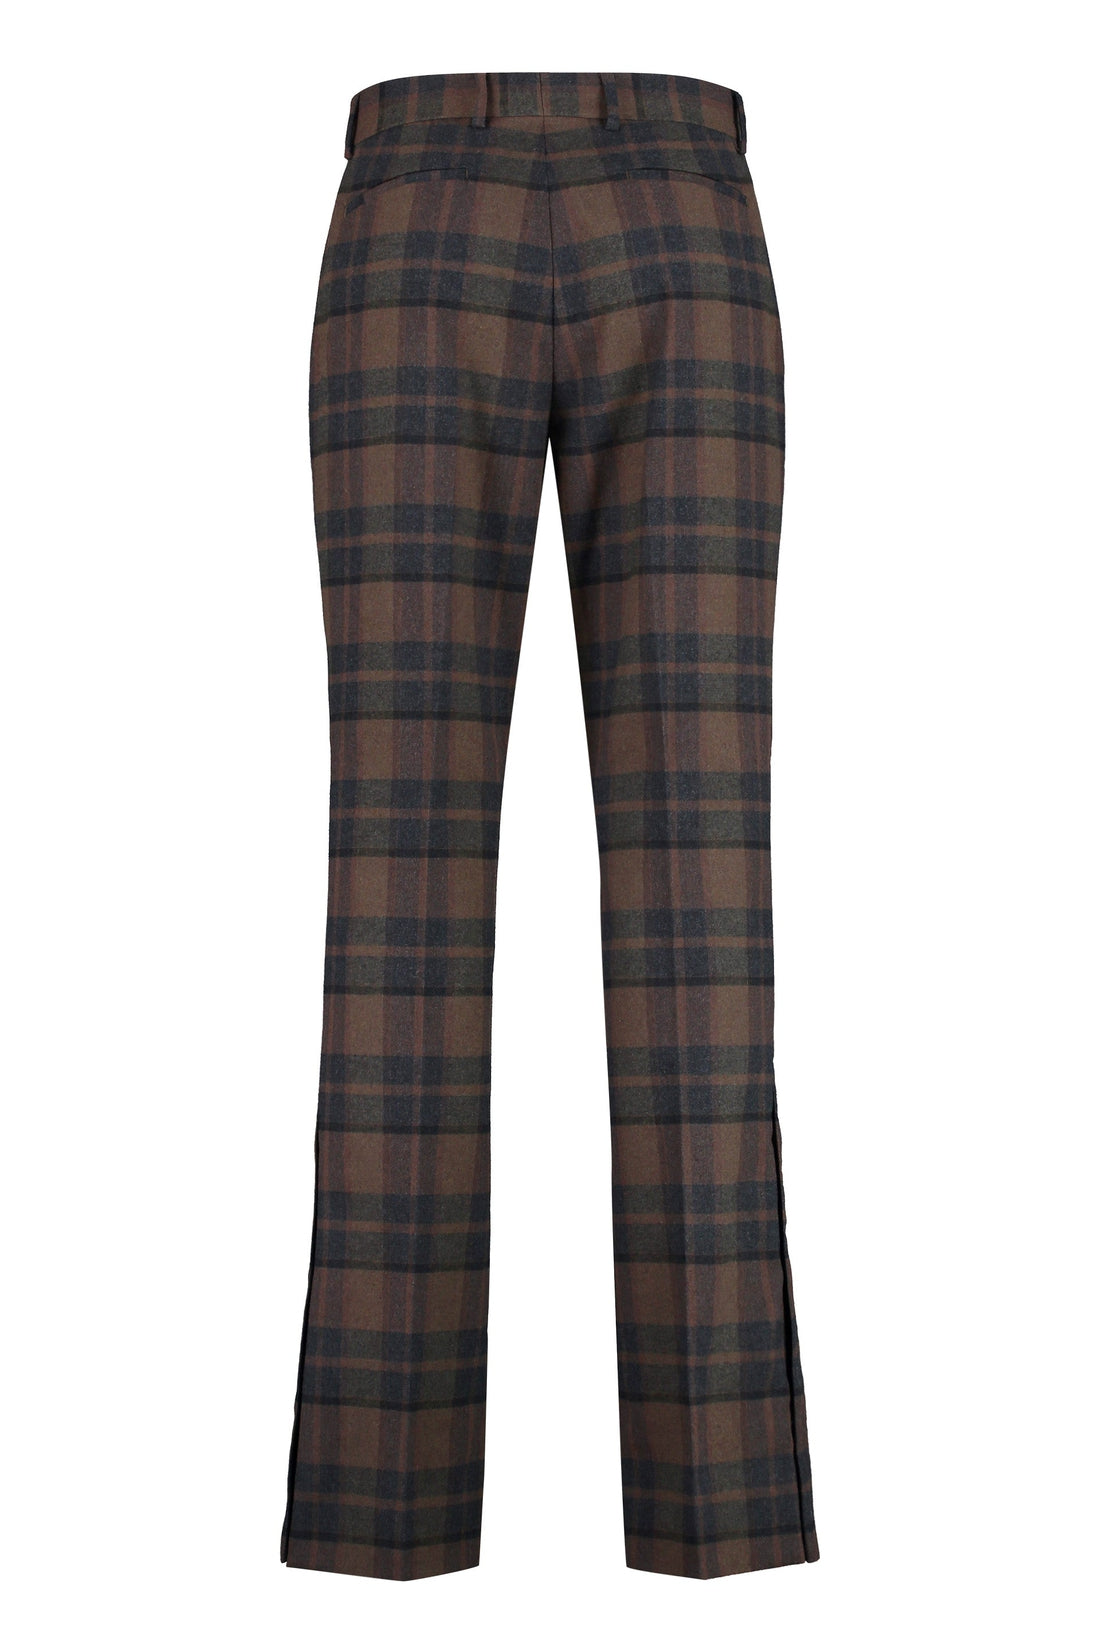 AMIRI-OUTLET-SALE-Printed flared trousers-ARCHIVIST